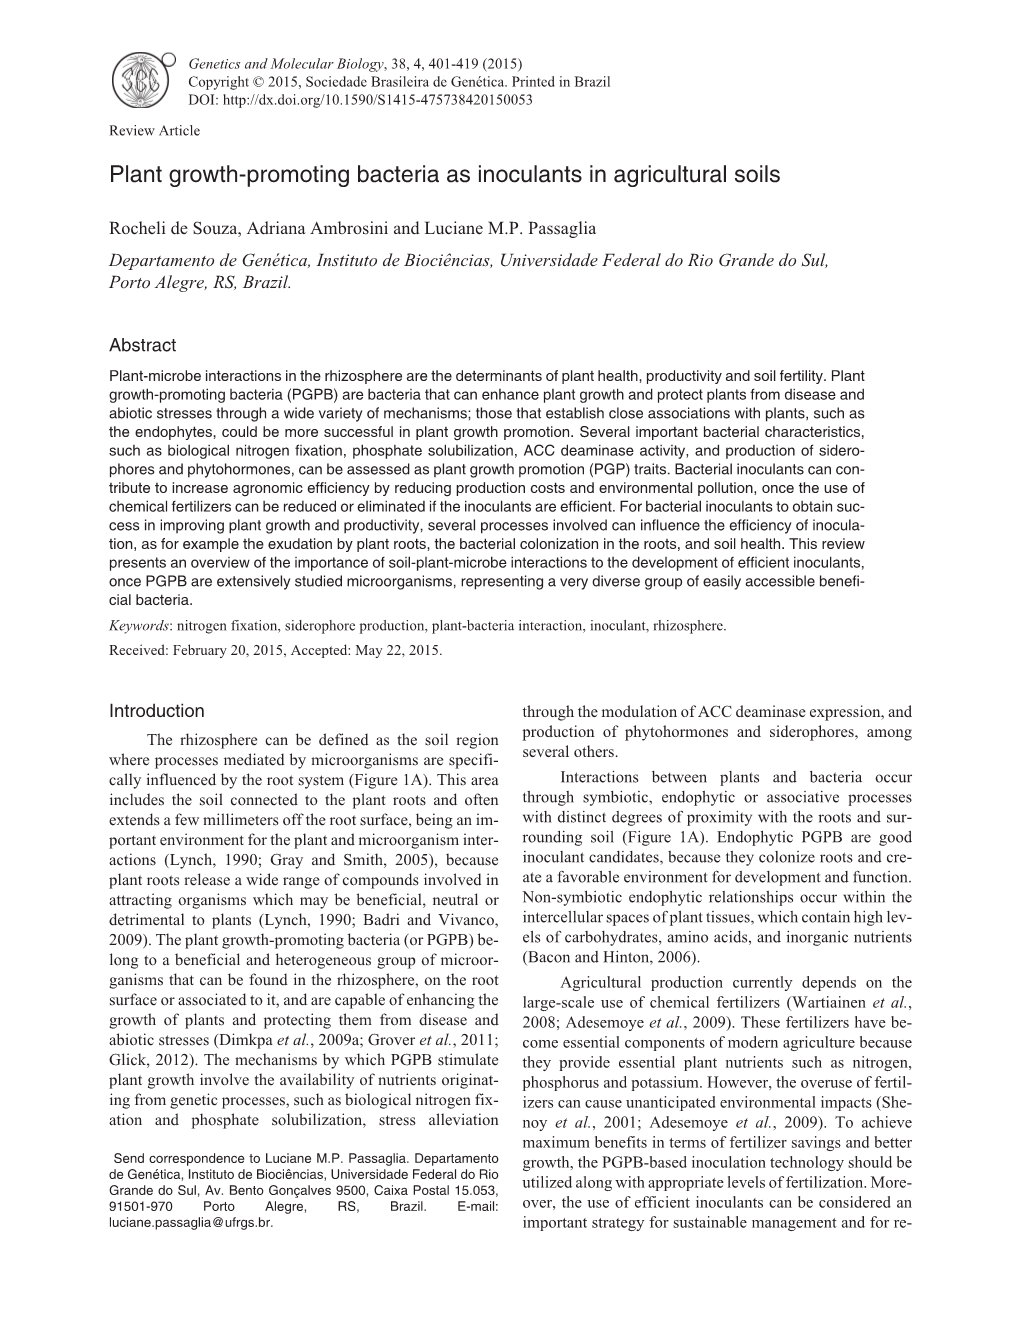 Plant Growth-Promoting Bacteria As Inoculants in Agricultural Soils